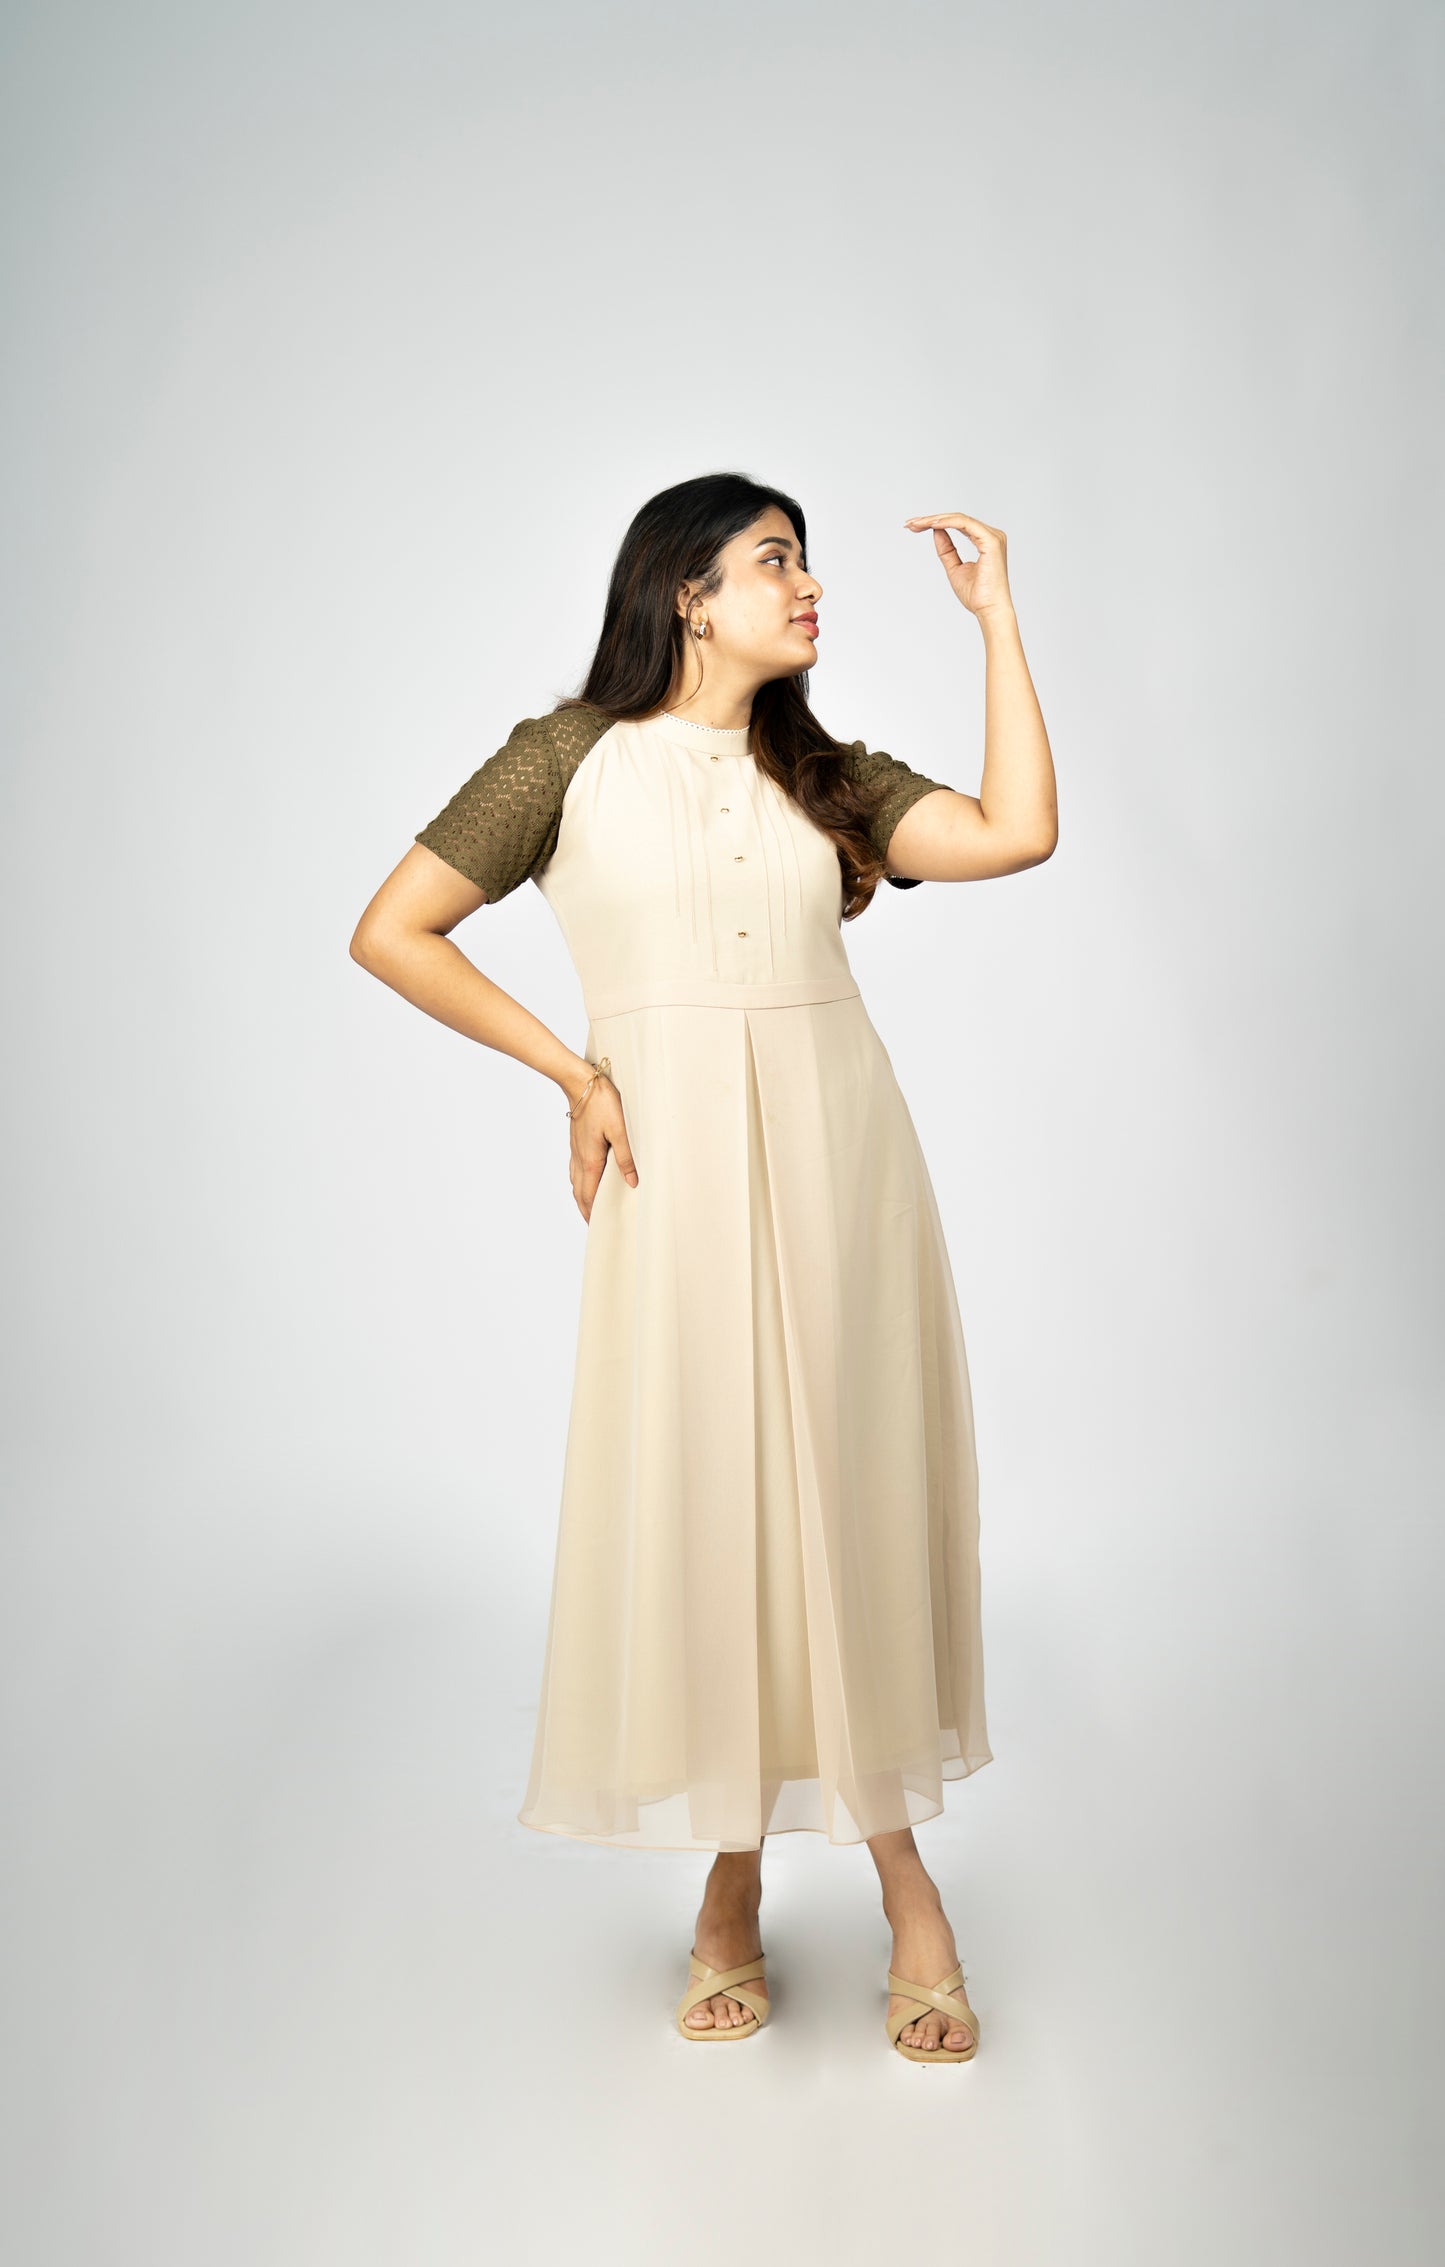 Western georgette dress/kurti in creamish beige shade highlighted with deep olive green lace fabric MBS-R134